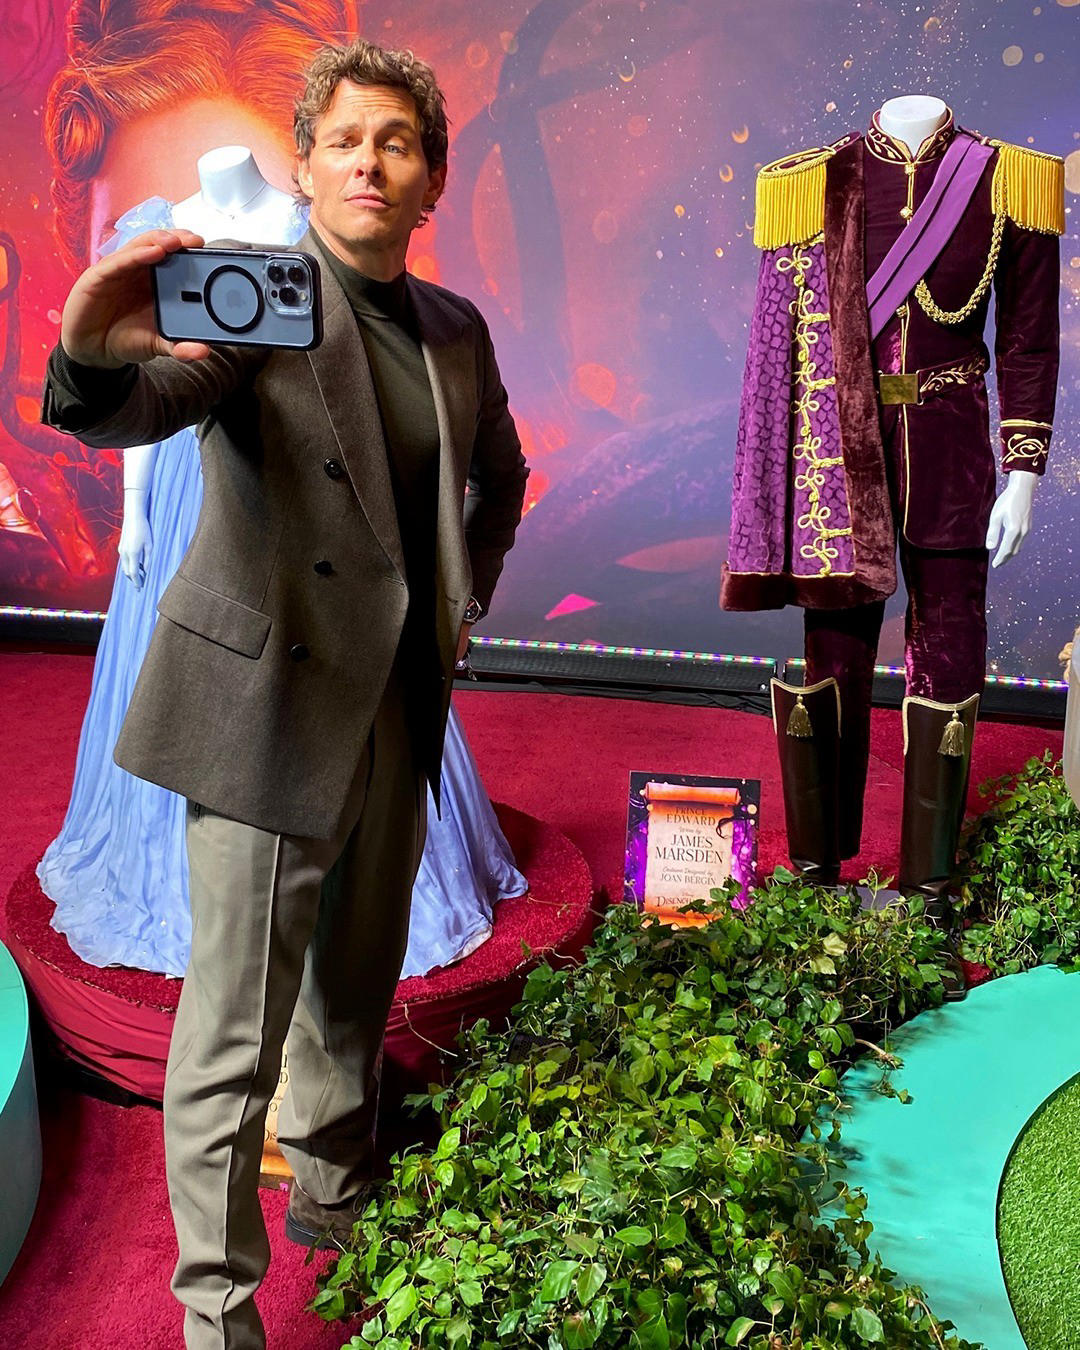 Disney+ - Just a reminder that #james_marsden loves Prince Edward as much as we do